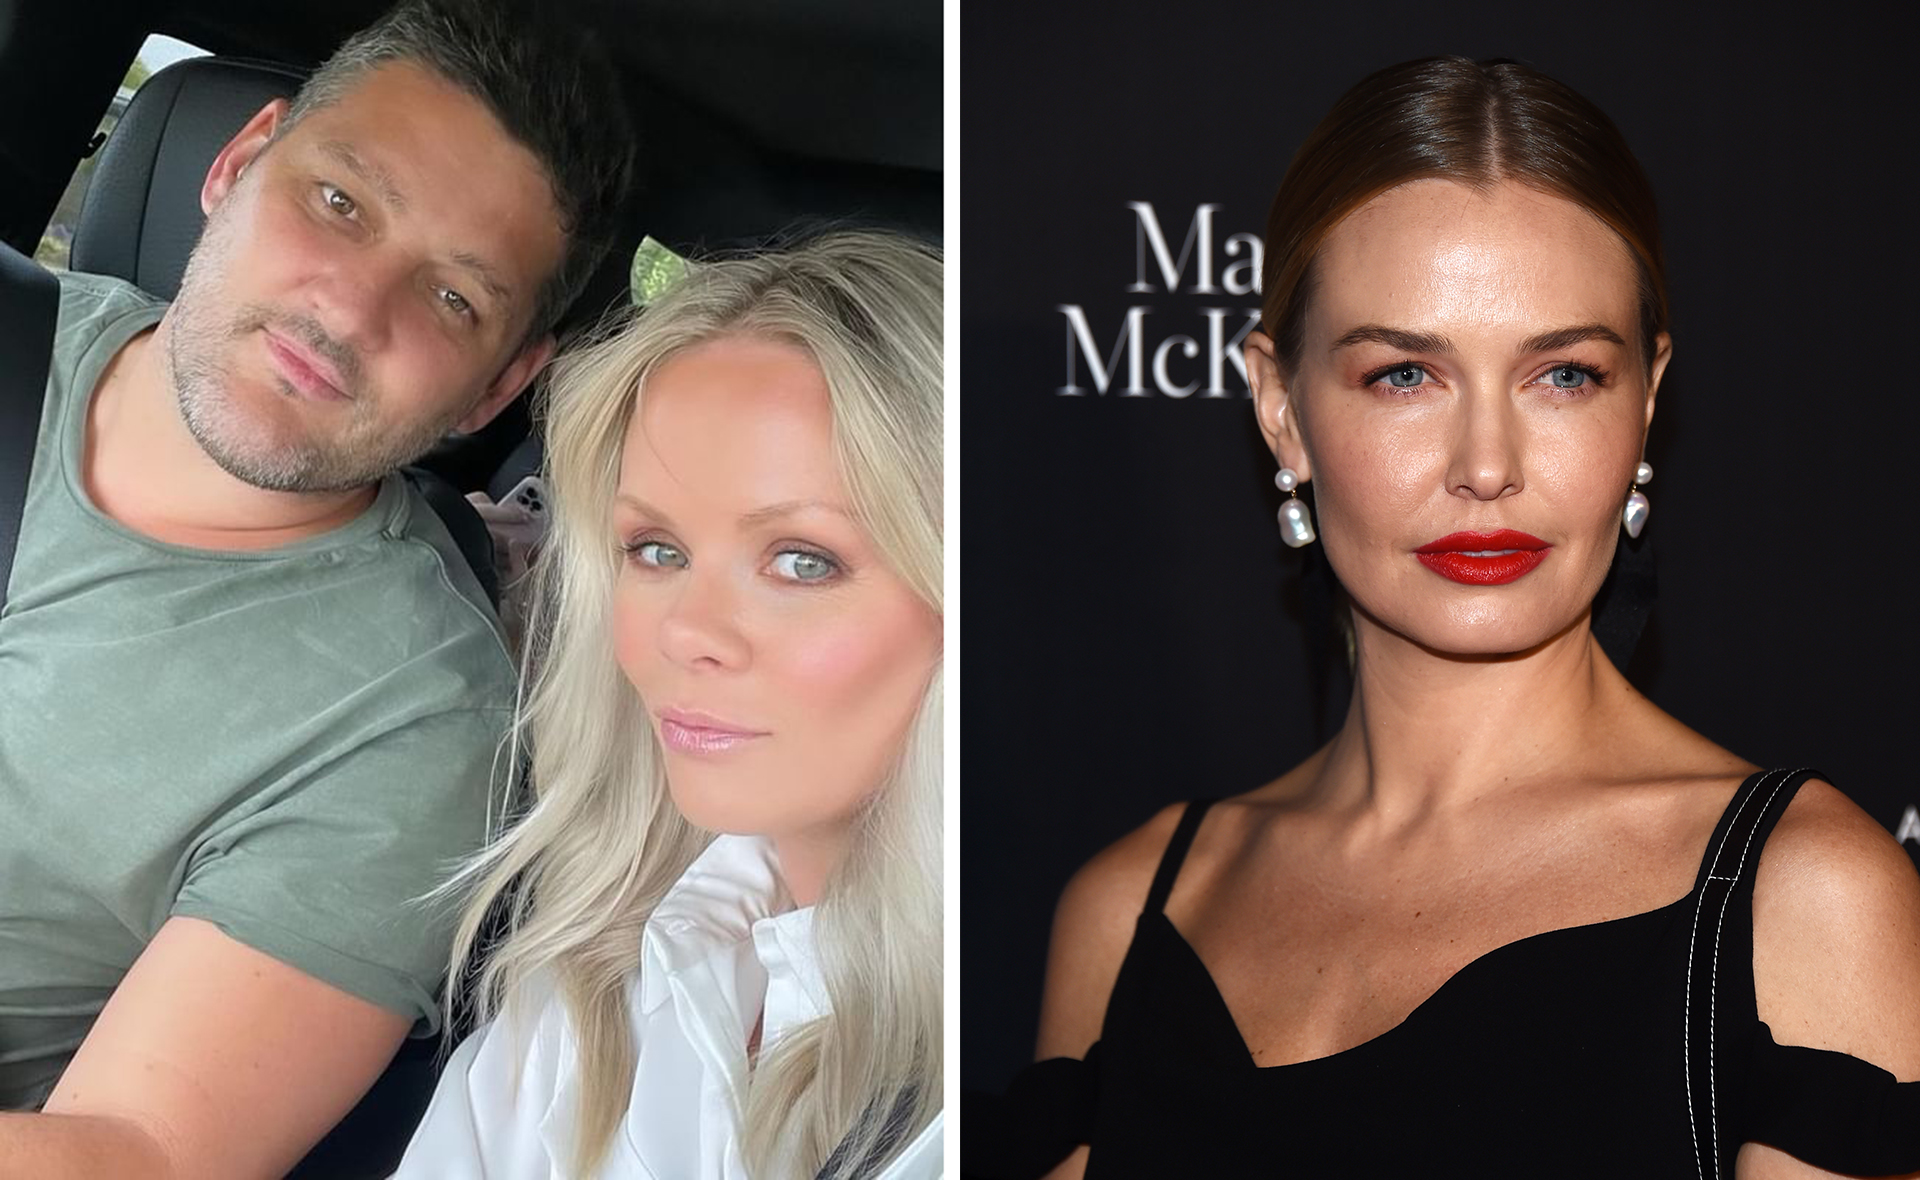 Alex Fevola reveals what happened when she confronted Lara Bingle over alleged affair with her husband Brendan